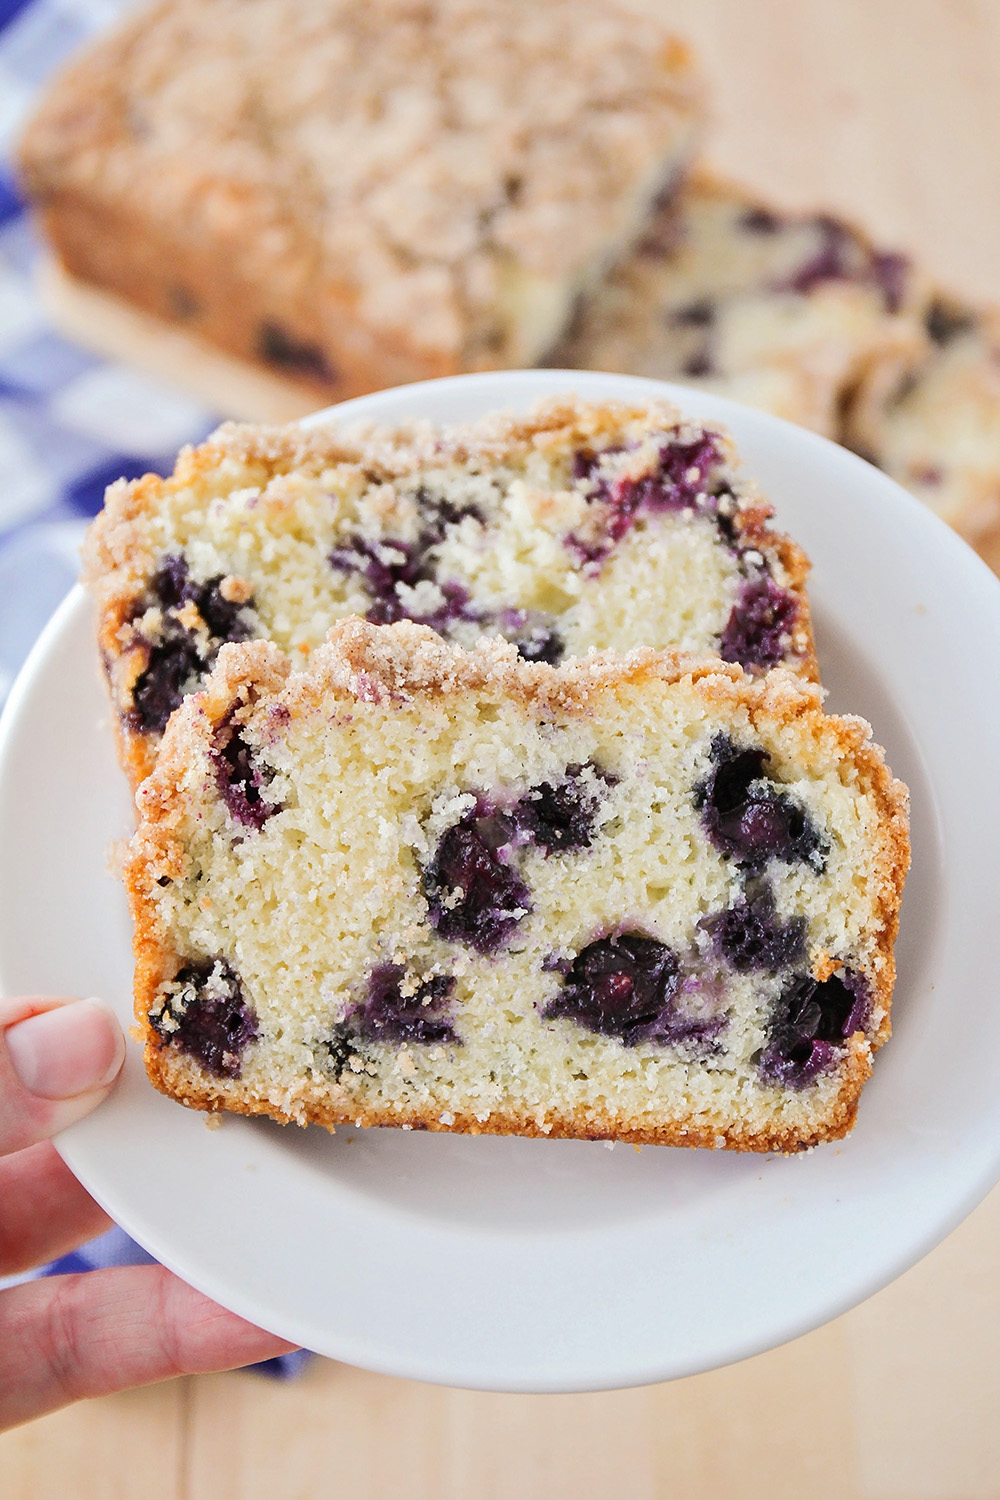 This blueberry muffin bread is so tender and sweet, and topped with a delicious buttery streusel. Perfect for breakfast or dessert!